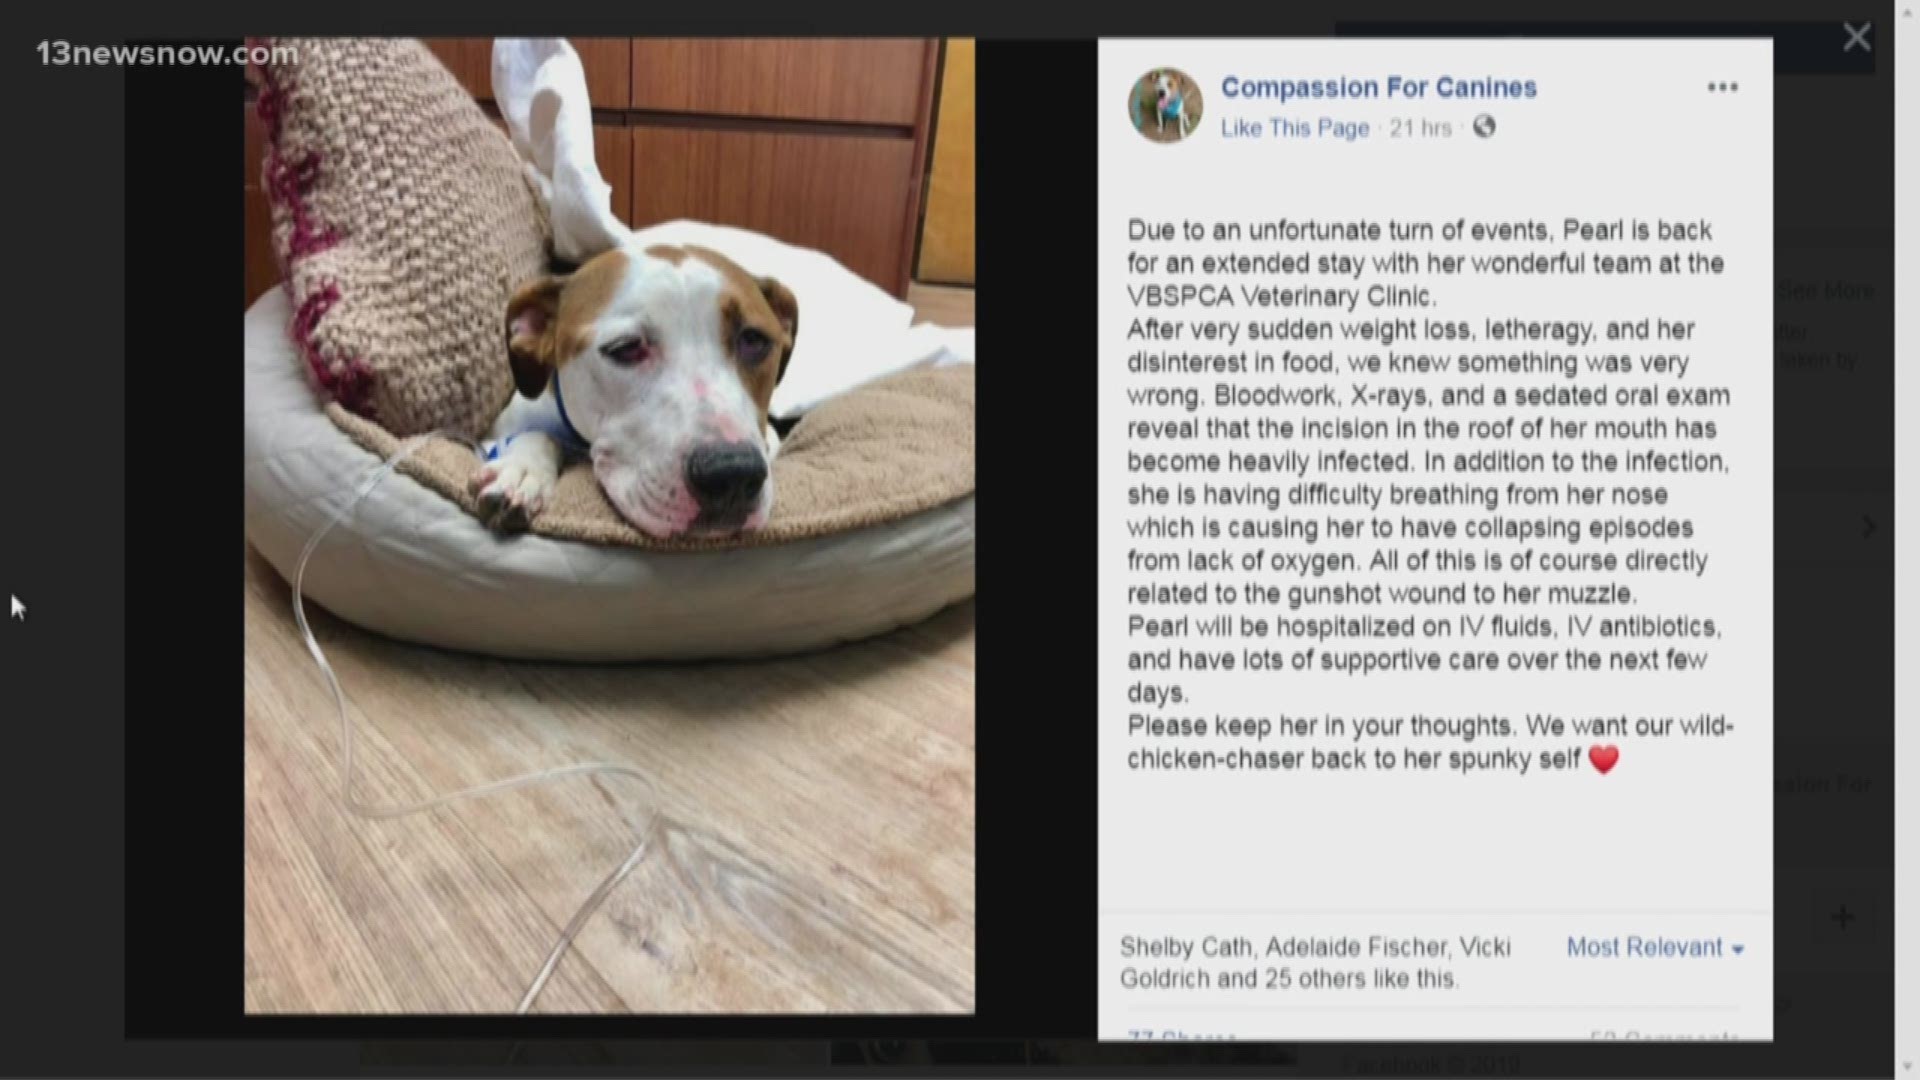 Pearl, a dog that was shot in the face in Virginia Beach, is back at the VBSPCA Veterinary Clinic due to sudden weight loss and other complications.